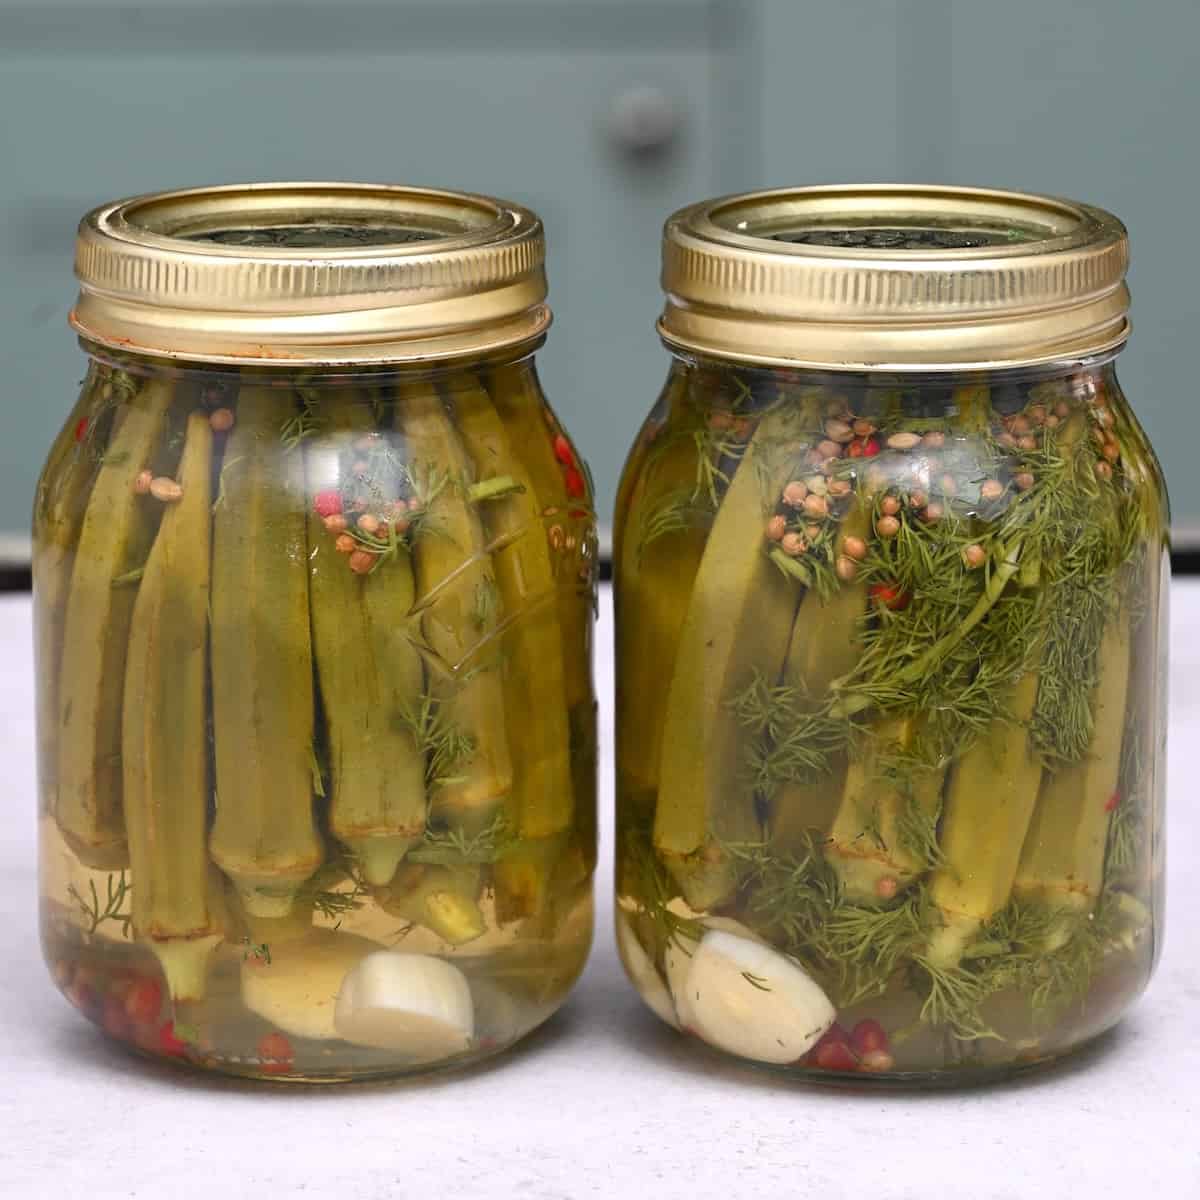 Two jars with homemade pickled okra